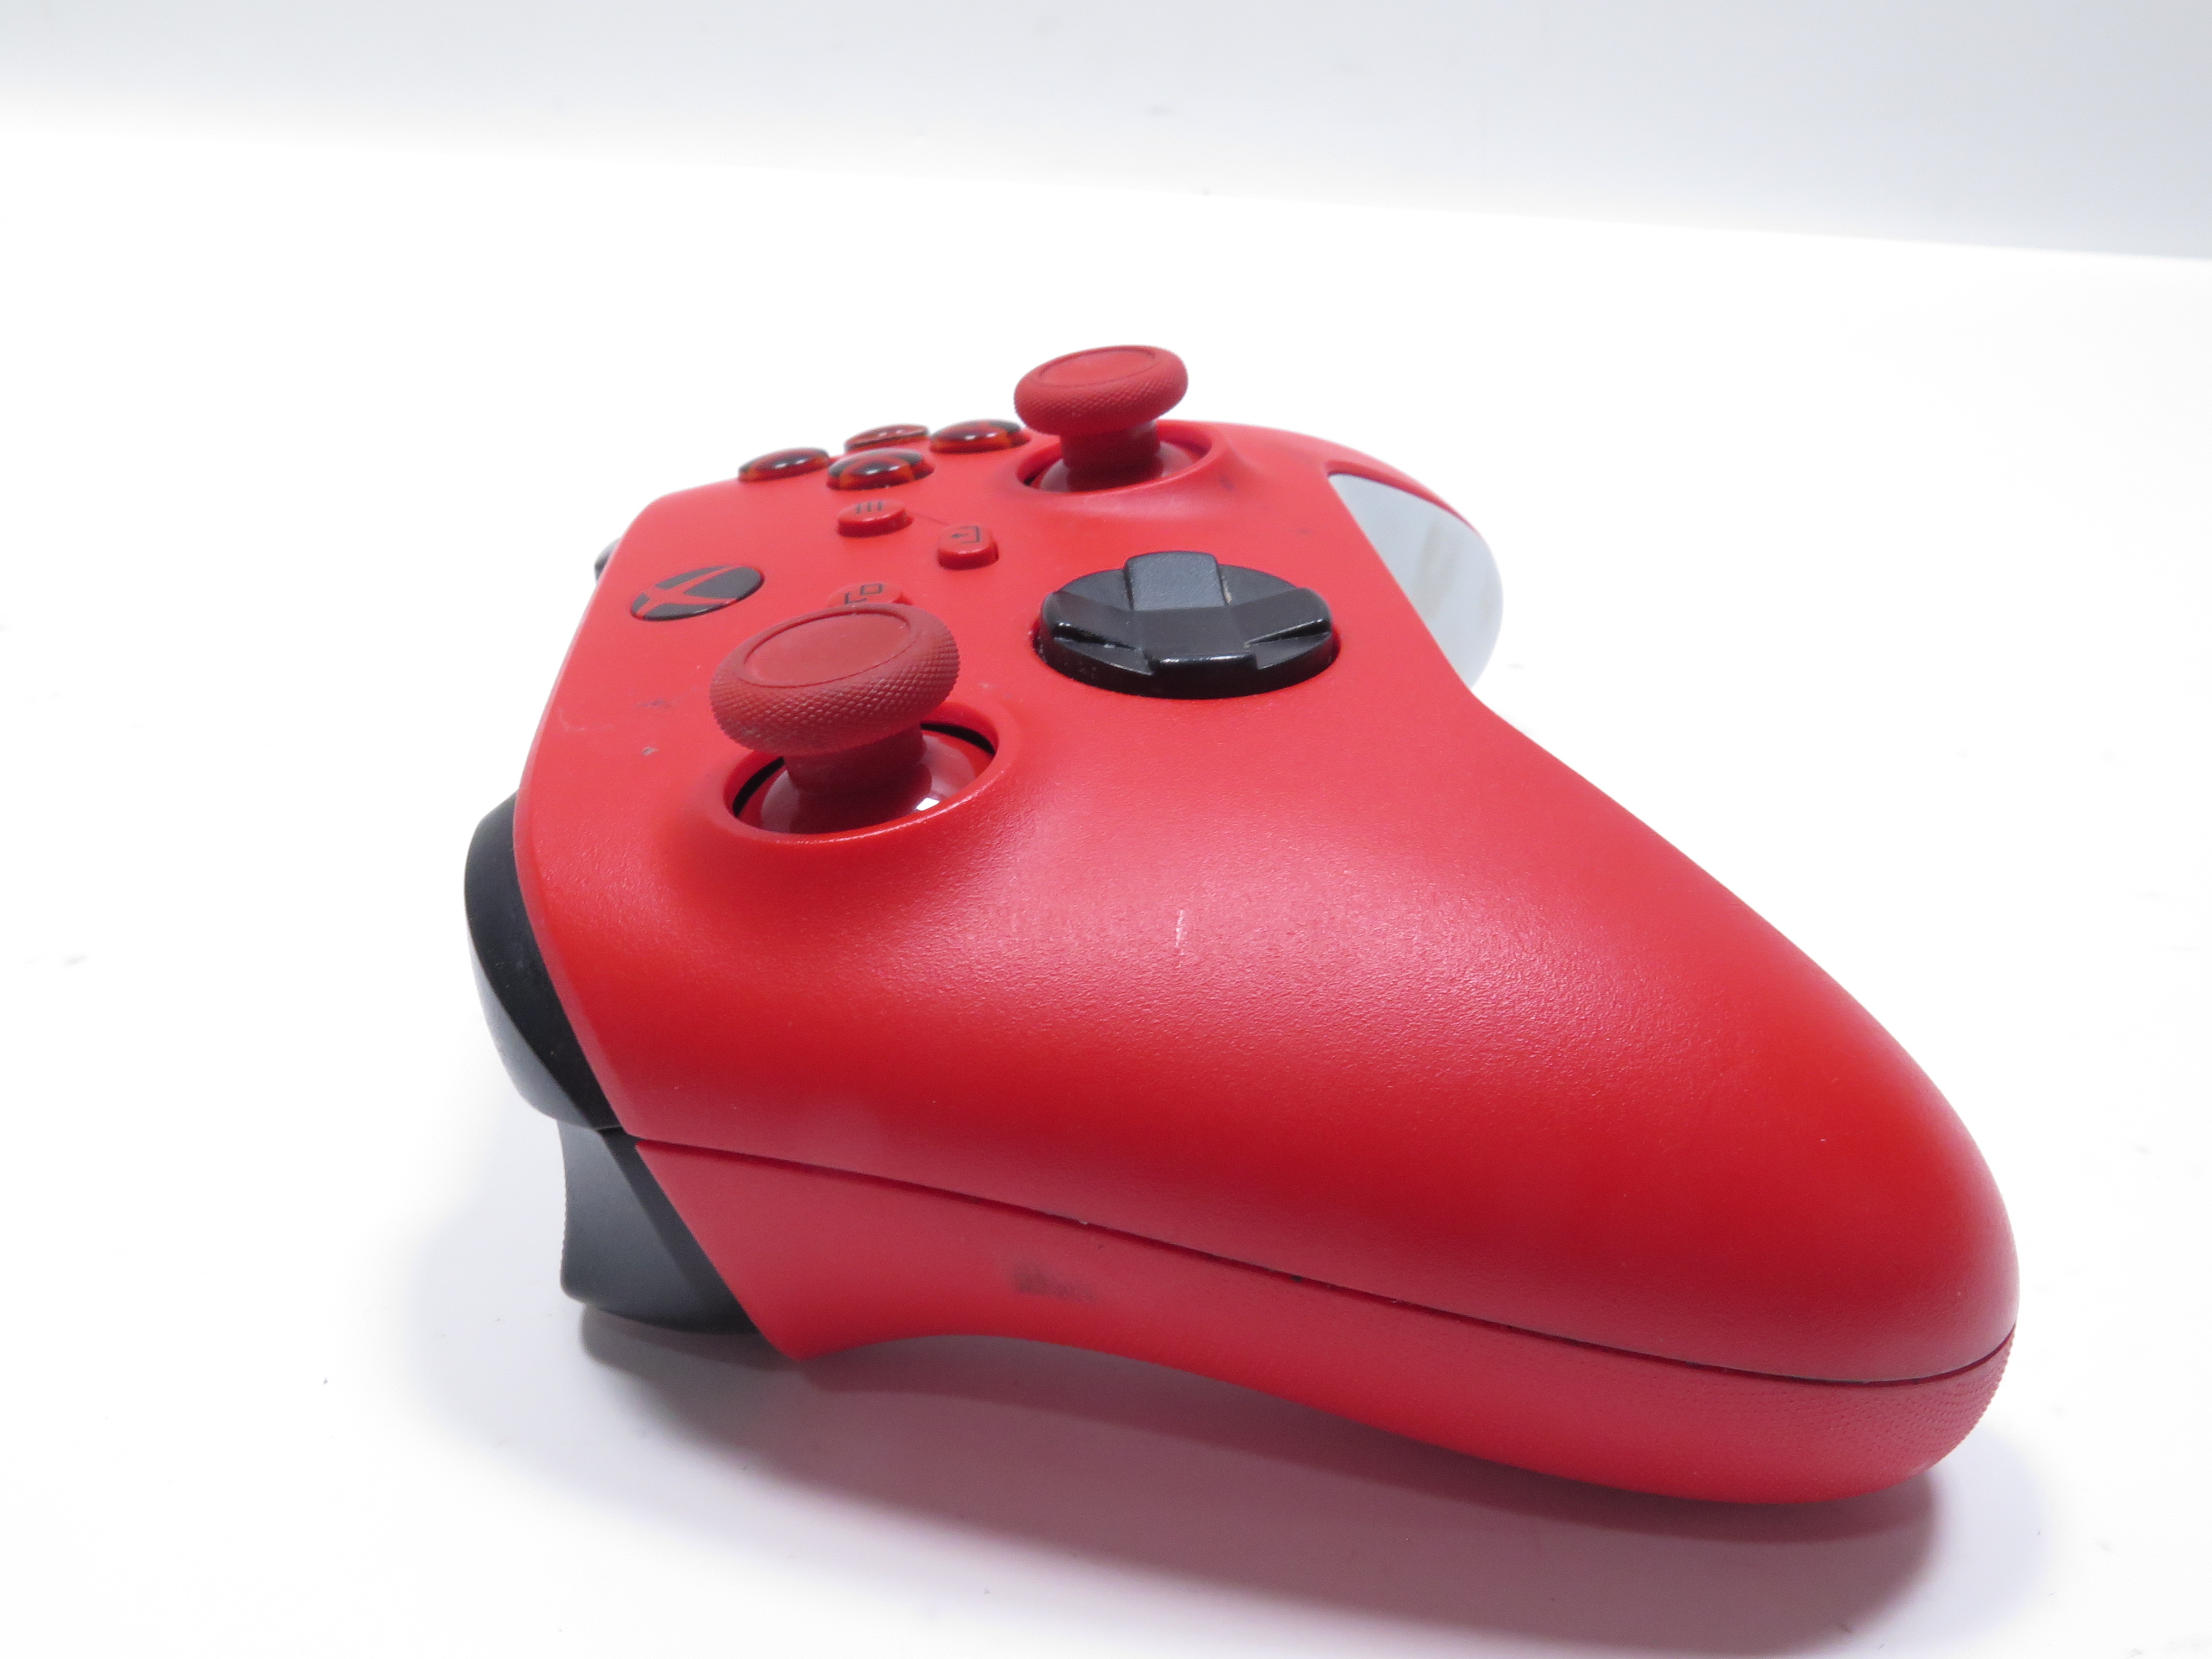 Microsoft Xbox Series X/S Controller in Red with Headset Xbox